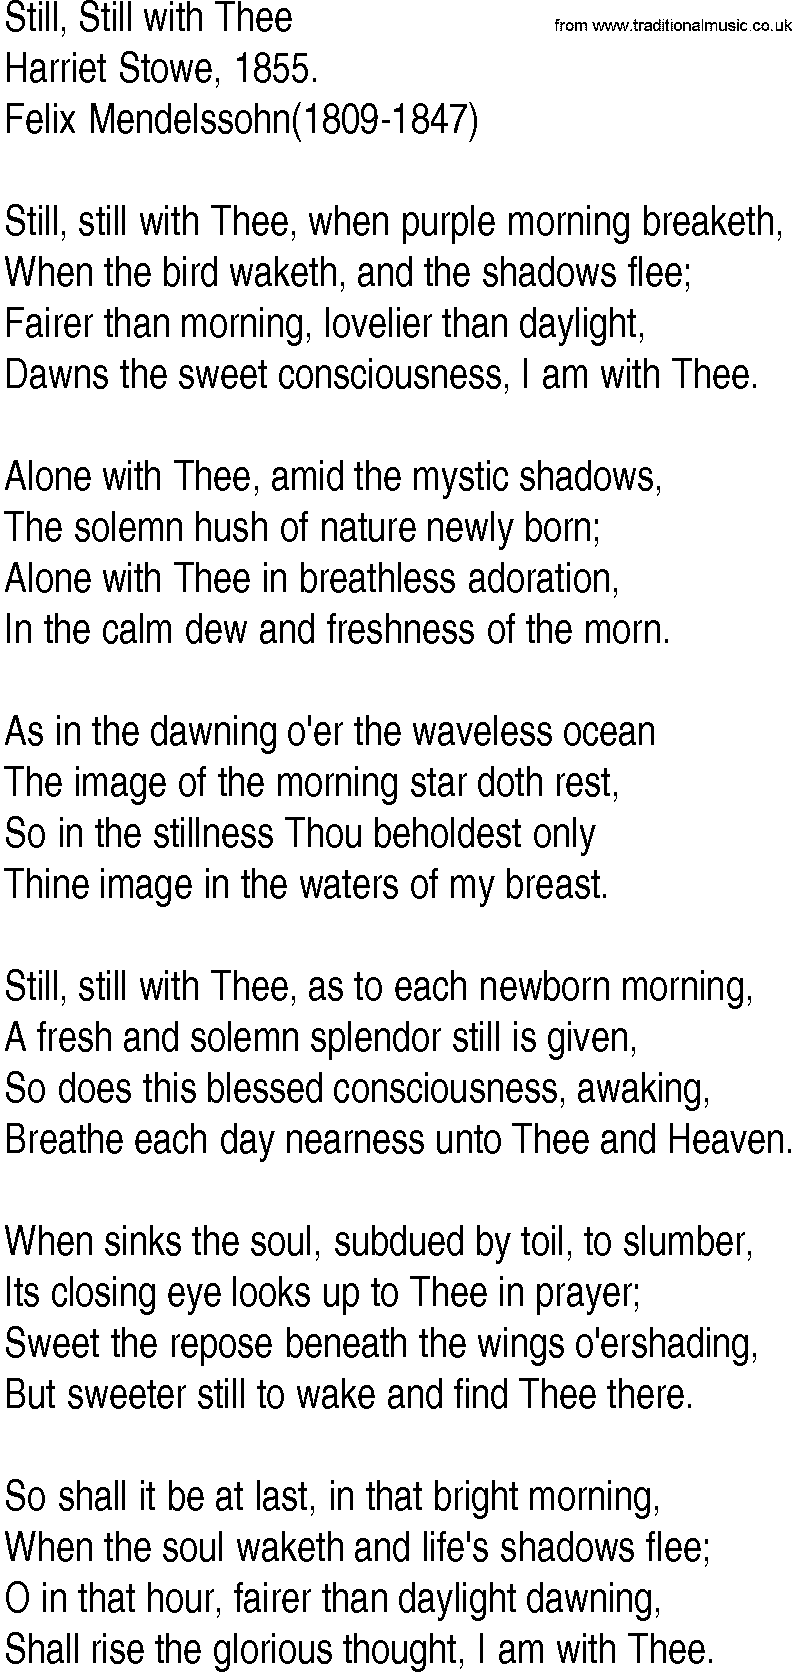 Hymn and Gospel Song: Still, Still with Thee by Harriet Stowe lyrics